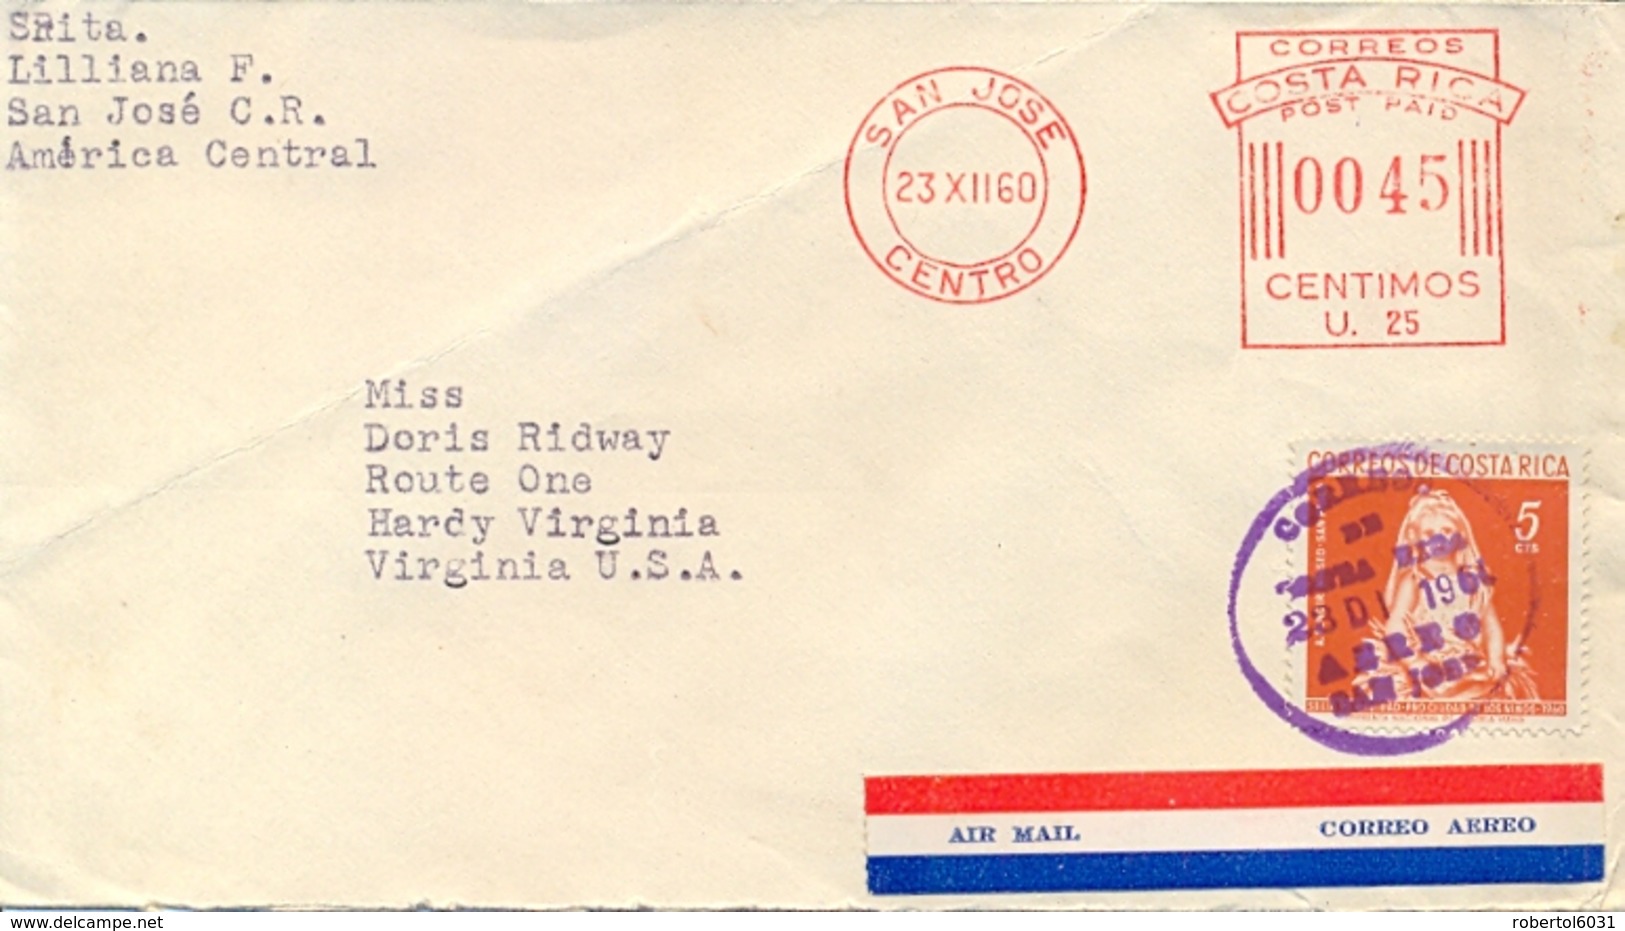 Costa Rica 1960 Cover To USA With Meter Cancel 45 Cts + Stamp 5 Cts Folded Envelope - Costa Rica